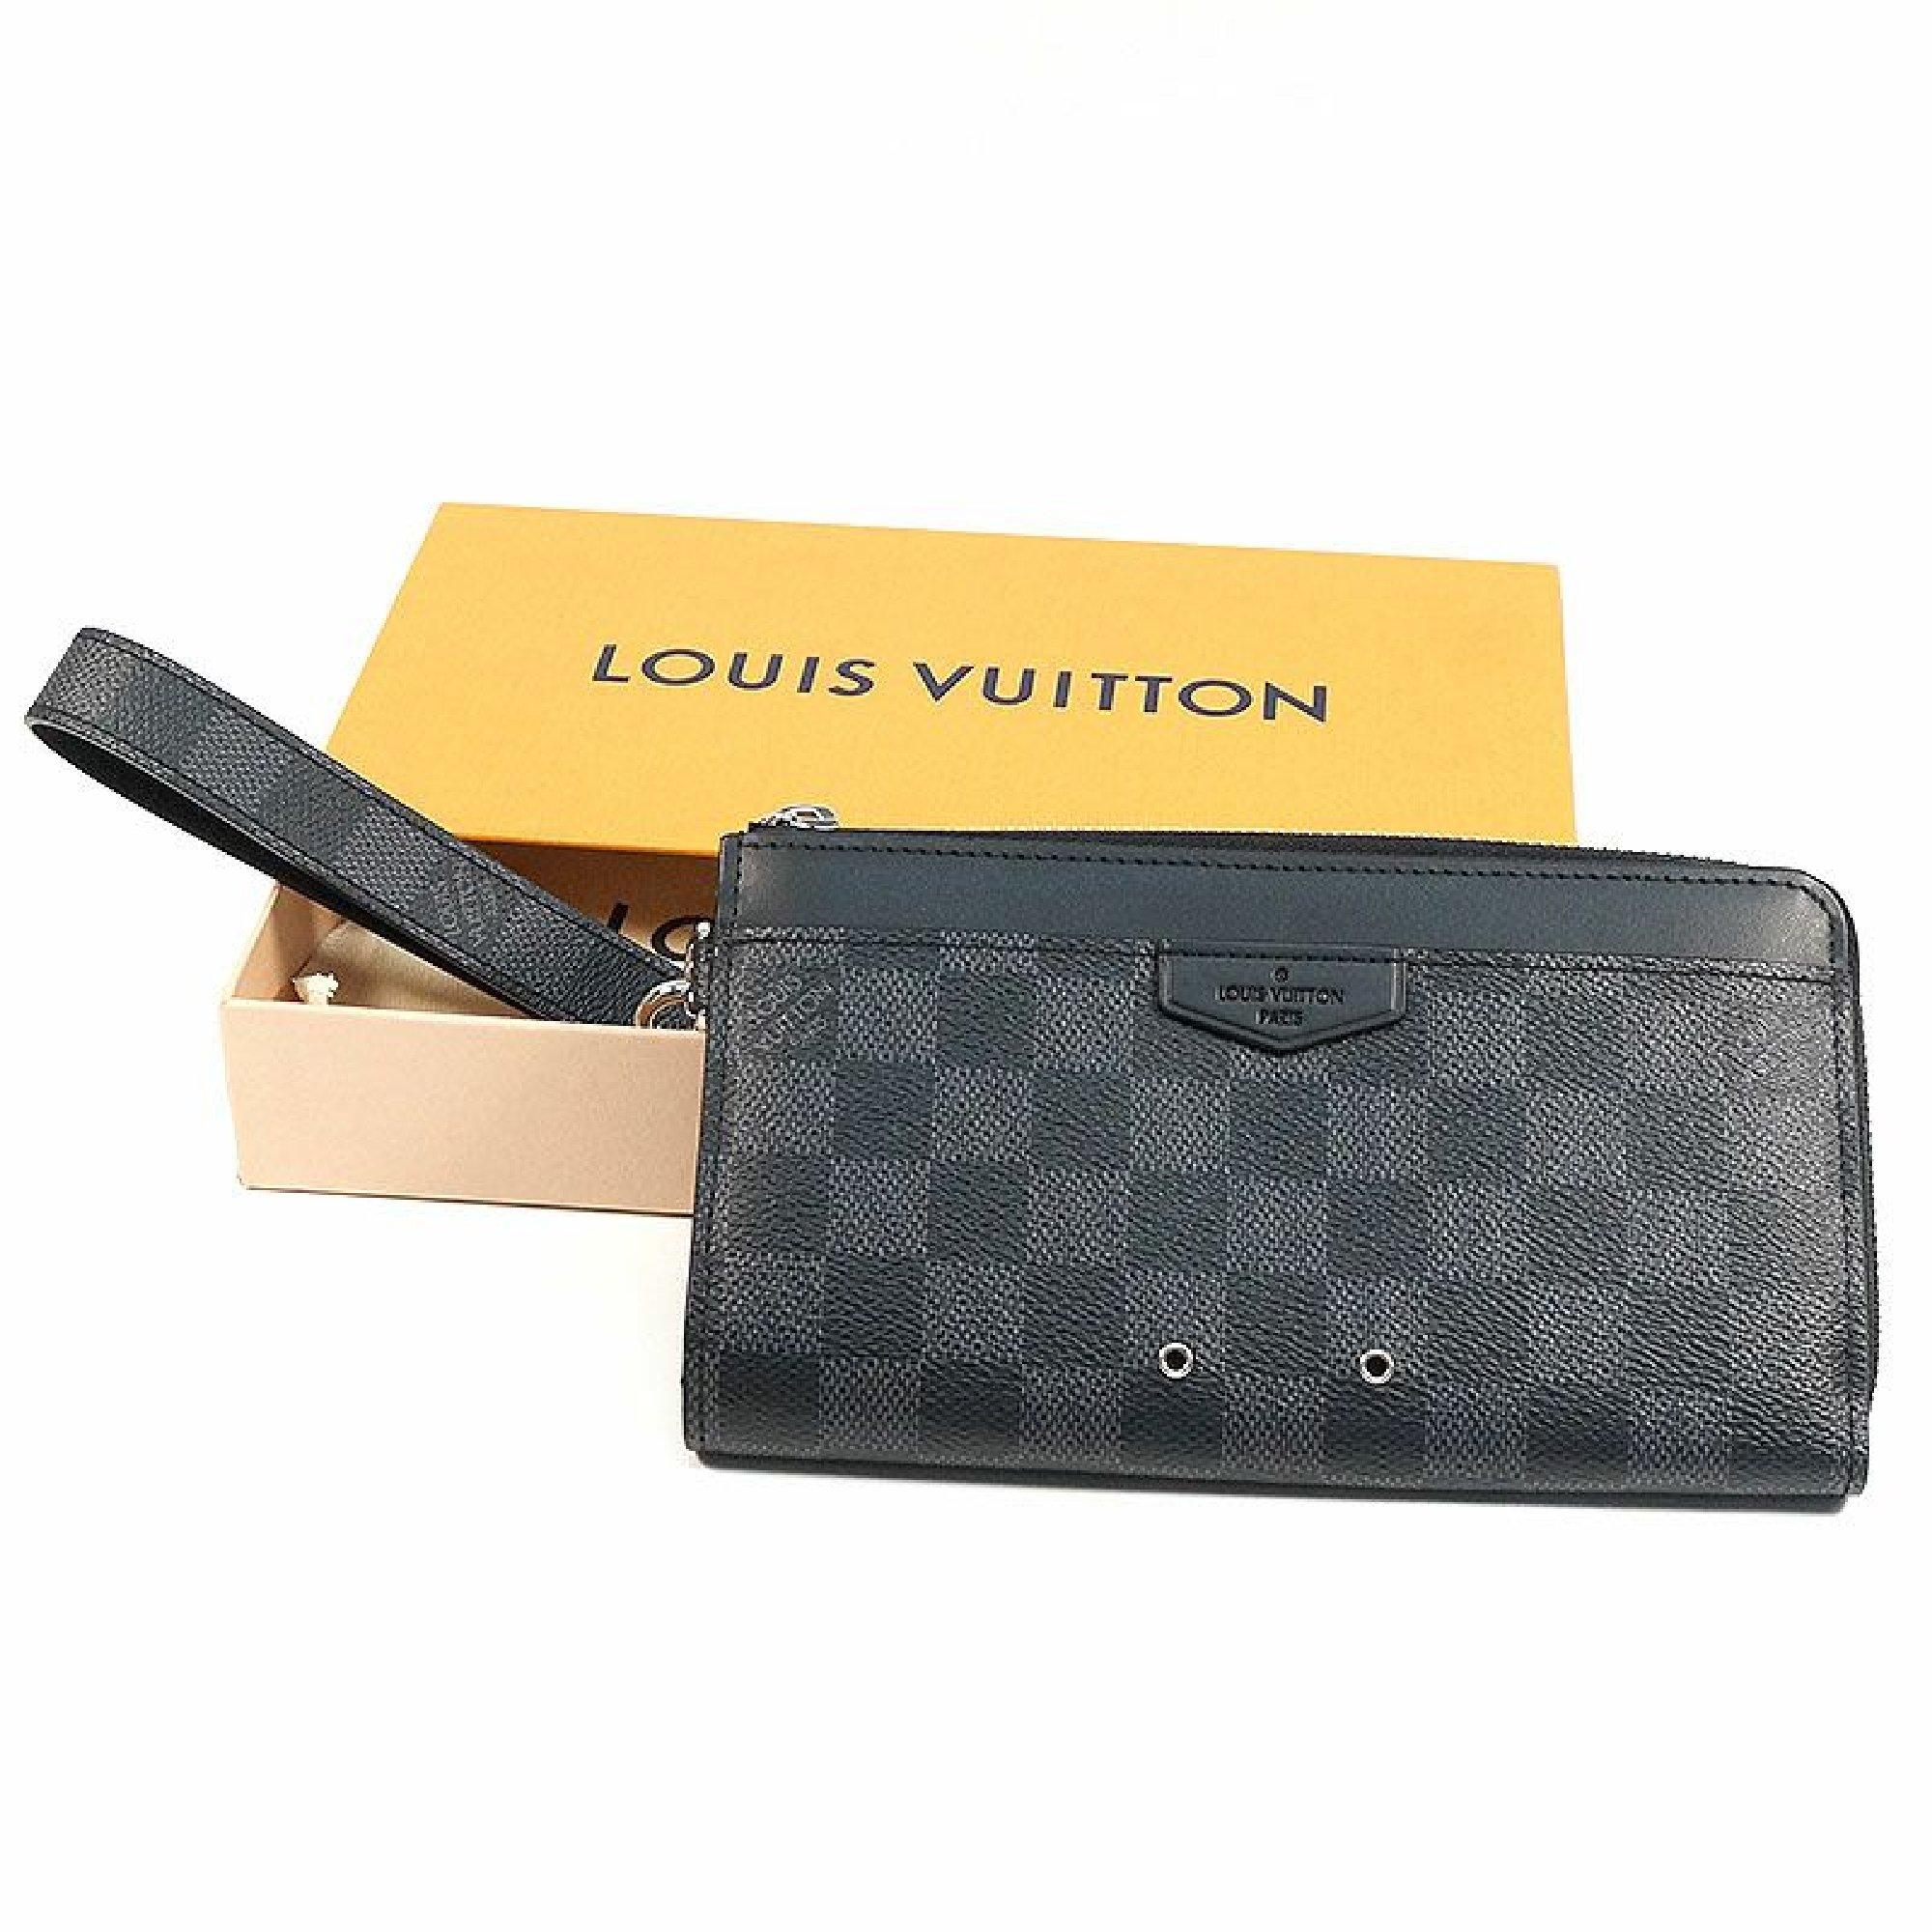 An authentic LOUIS VUITTON Zippy Dragonne Mens long wallet N60379 The outside material is Damier graphite canvas. The pattern is Zippy Dragonne. This item is Contemporary. The year of manufacture would be 2020.
Rank
Same as S new product
Slightly